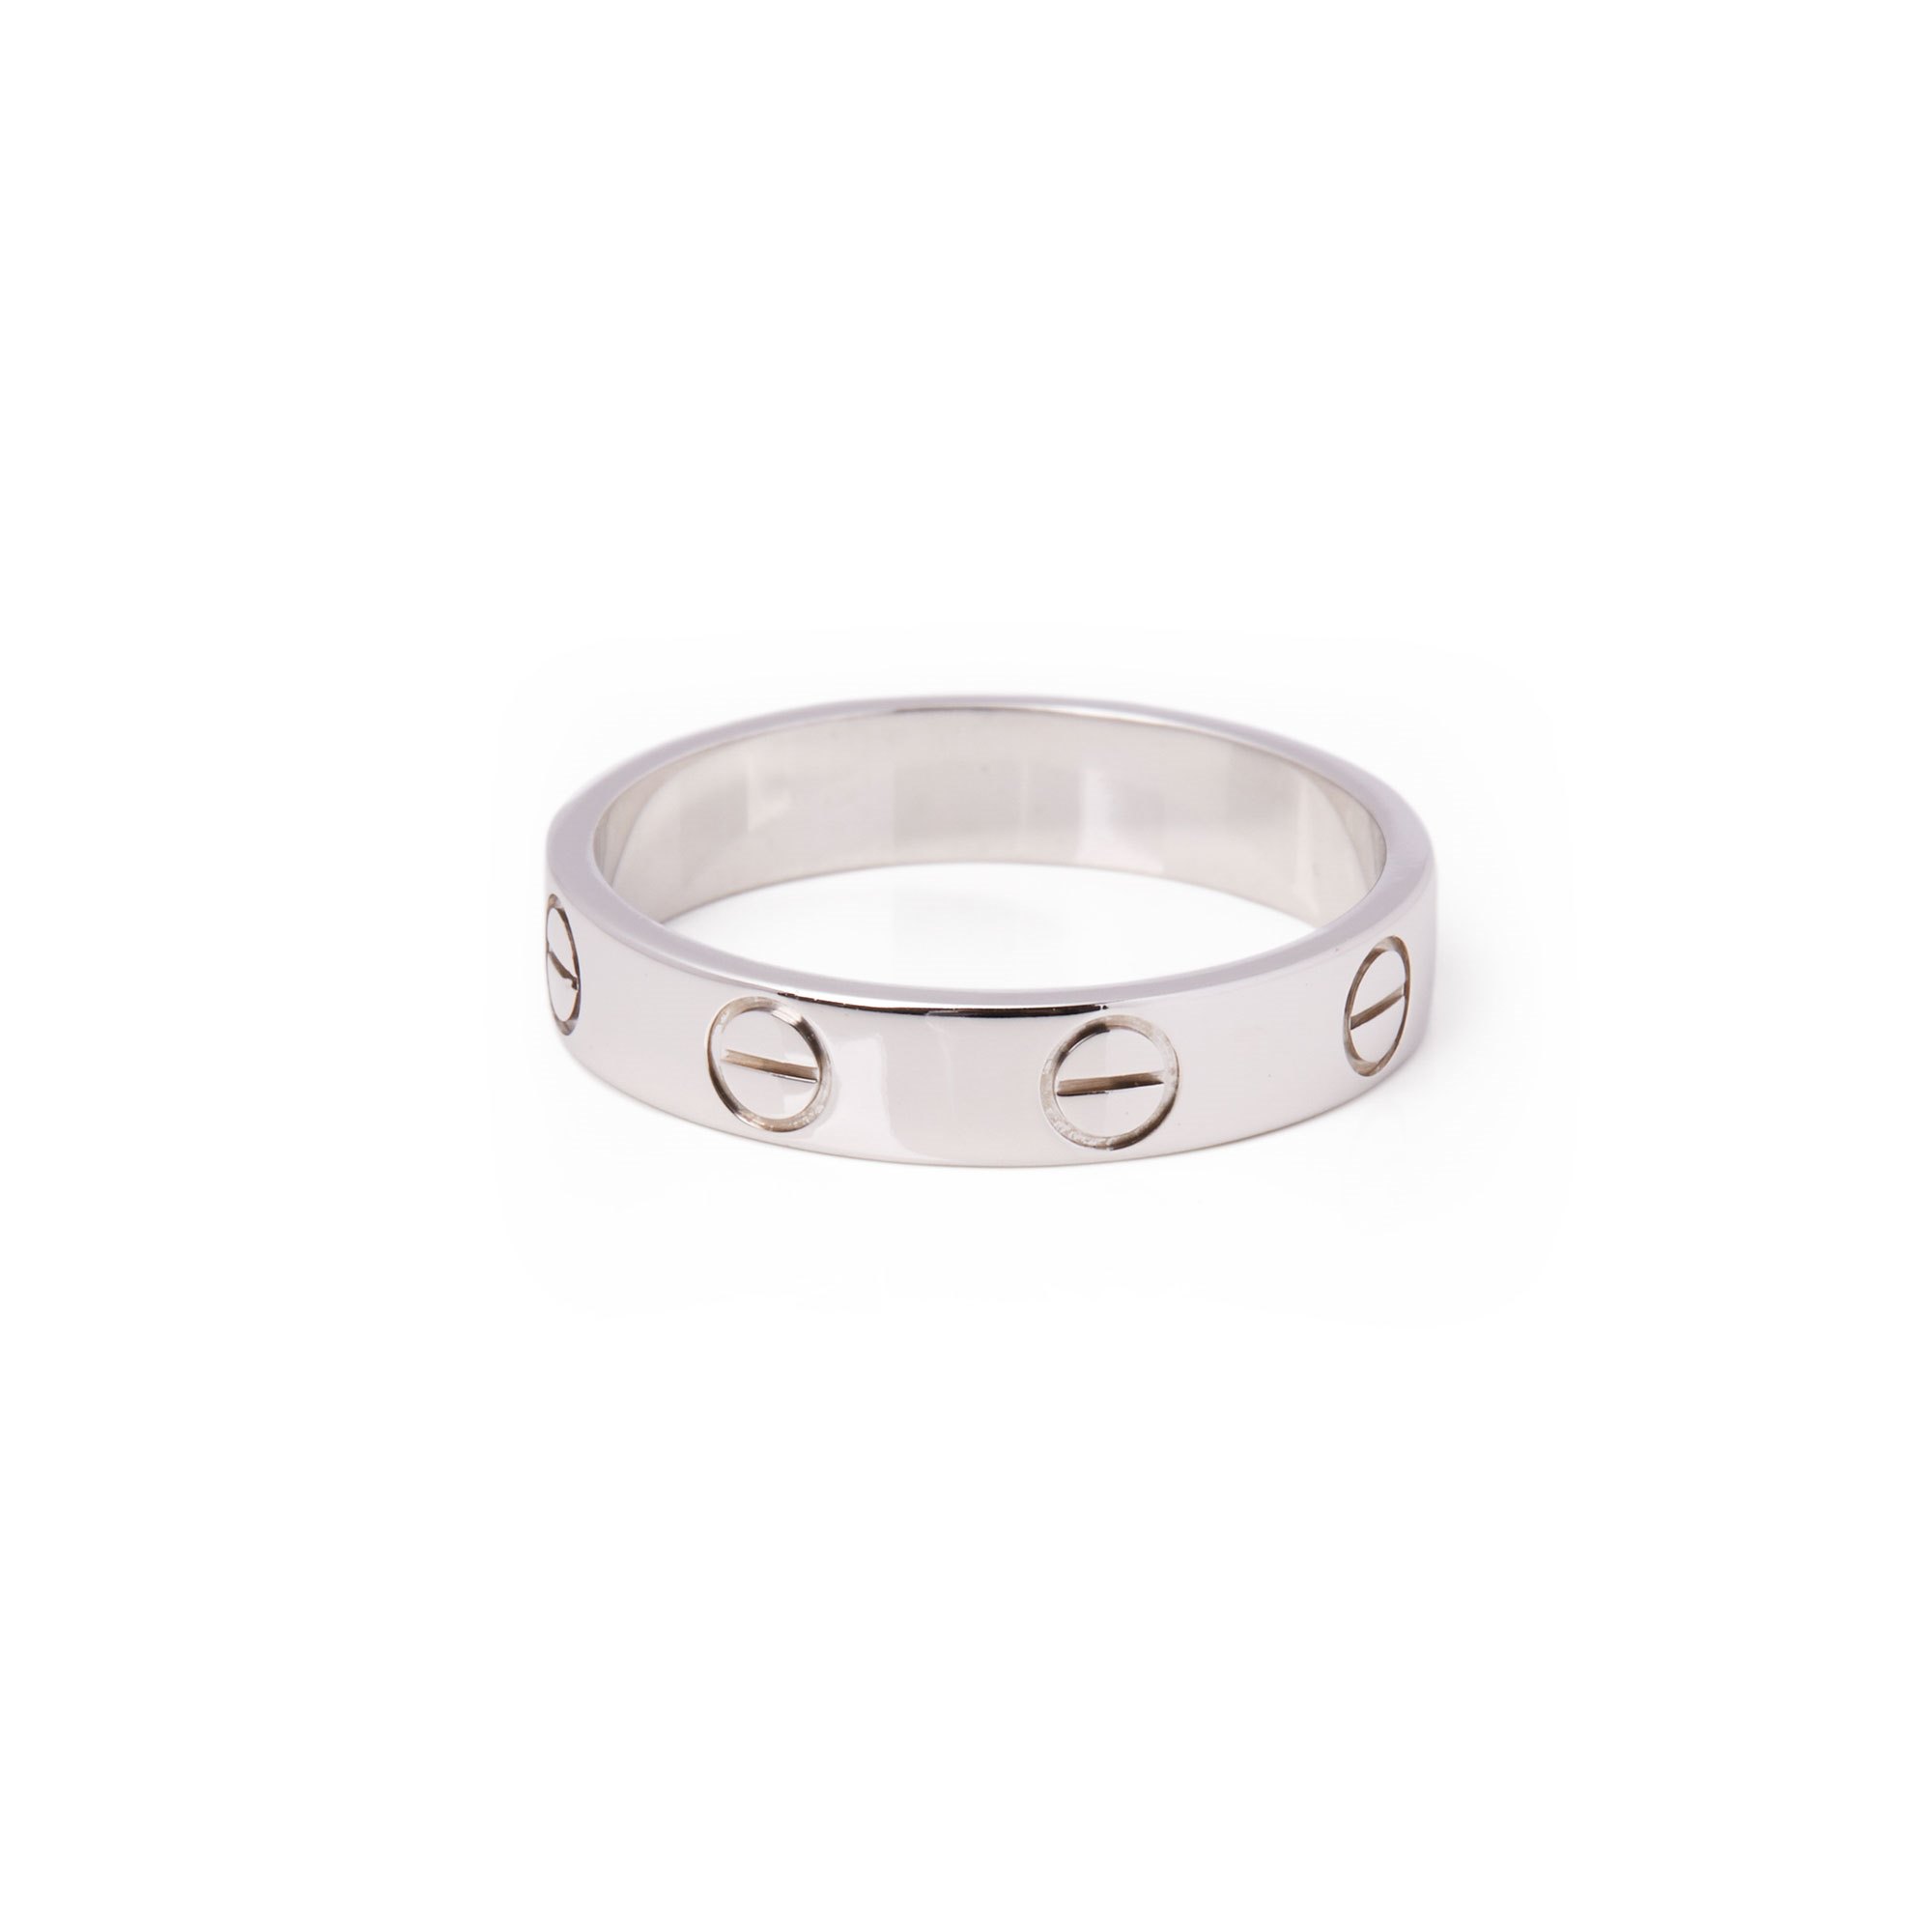 Cartier Love 18ct White Gold Wedding Band Ring